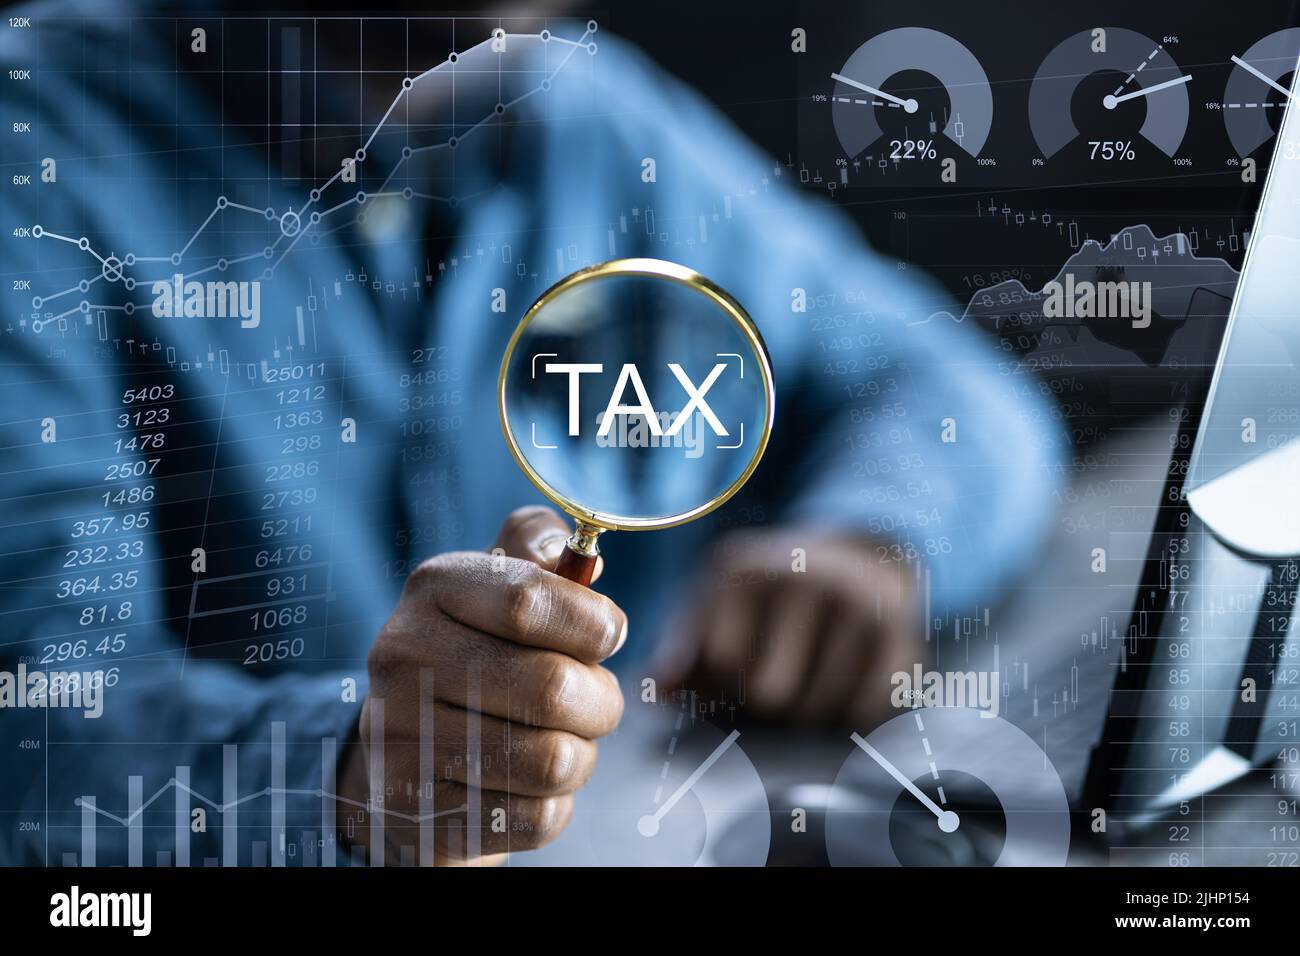 Tax Credit Deduction On Magnifying Glass. African American Hand Stock Photo